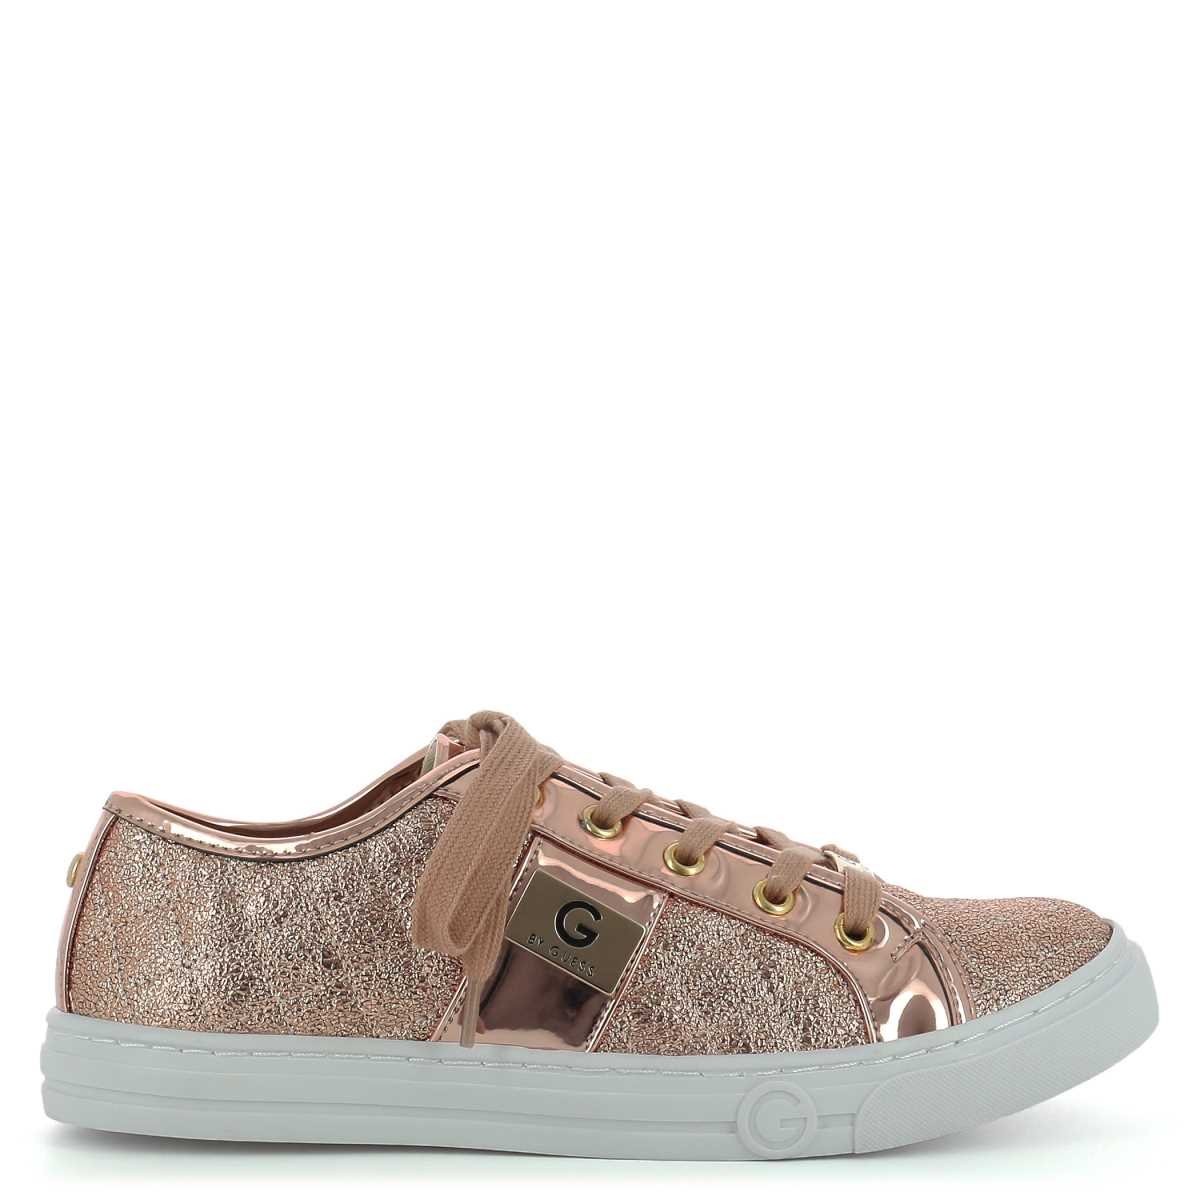 Tenis Spring Rosa G By Guess